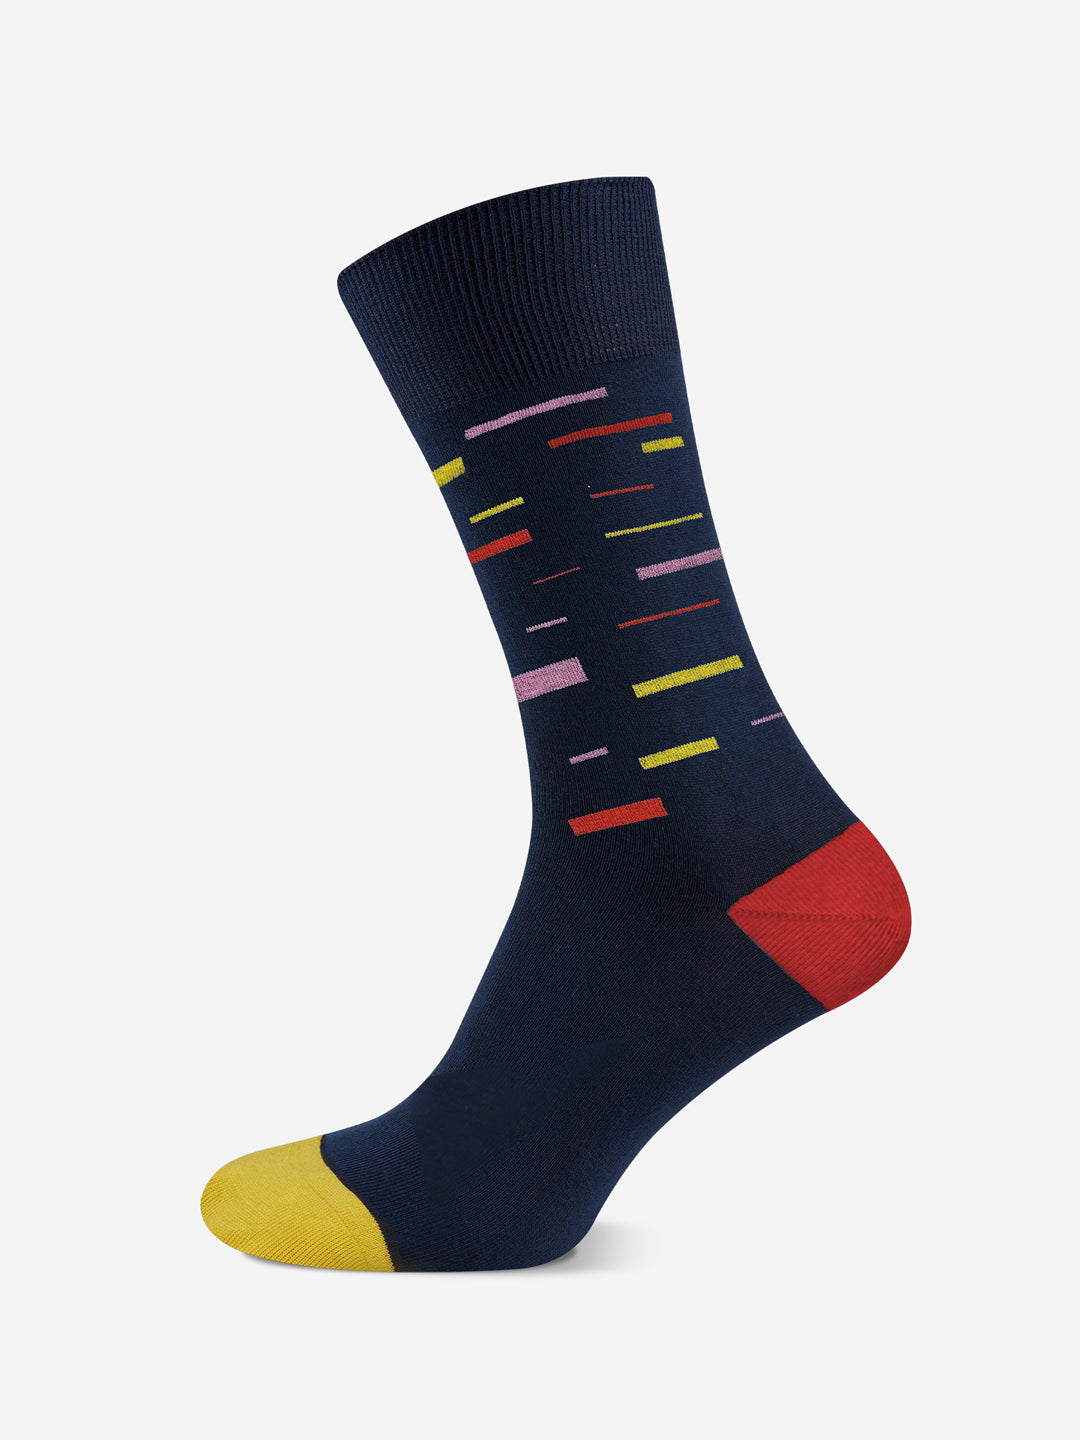 Grand Tours - Speed - Chaussettes Casual